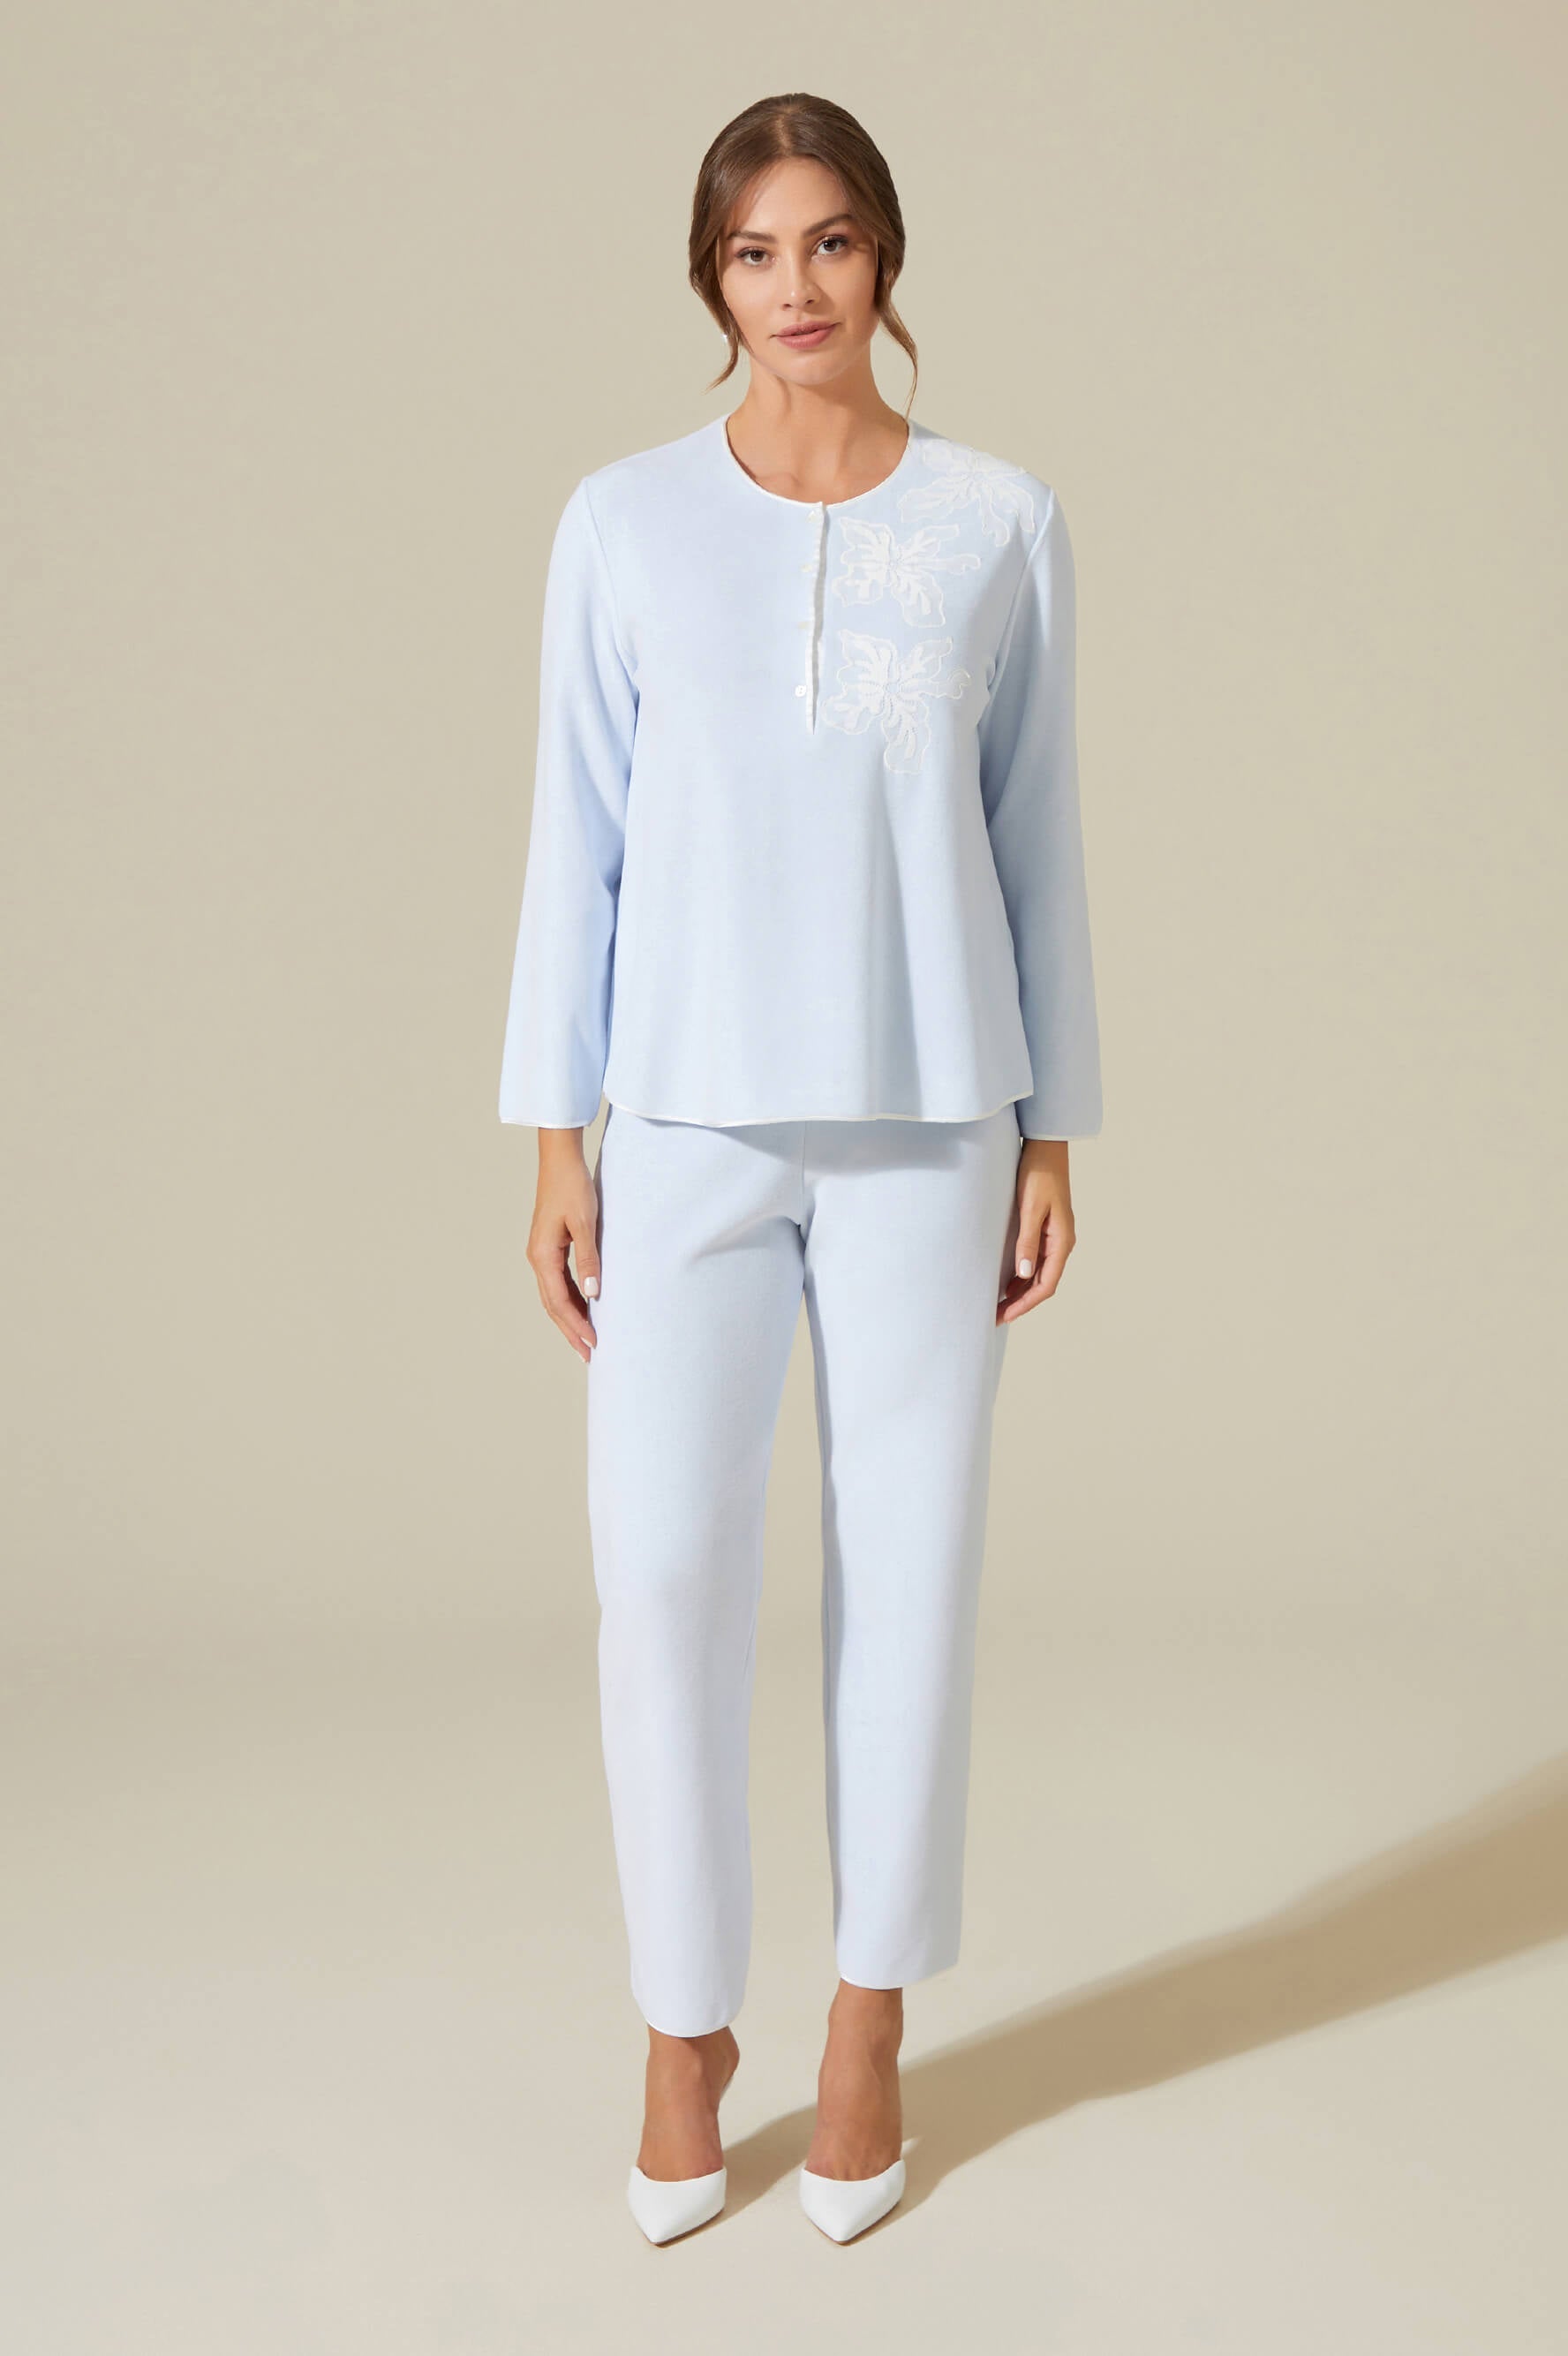 Maya Trimmed and Buttoned Velvet PJ Set - Off White on Baby Blue